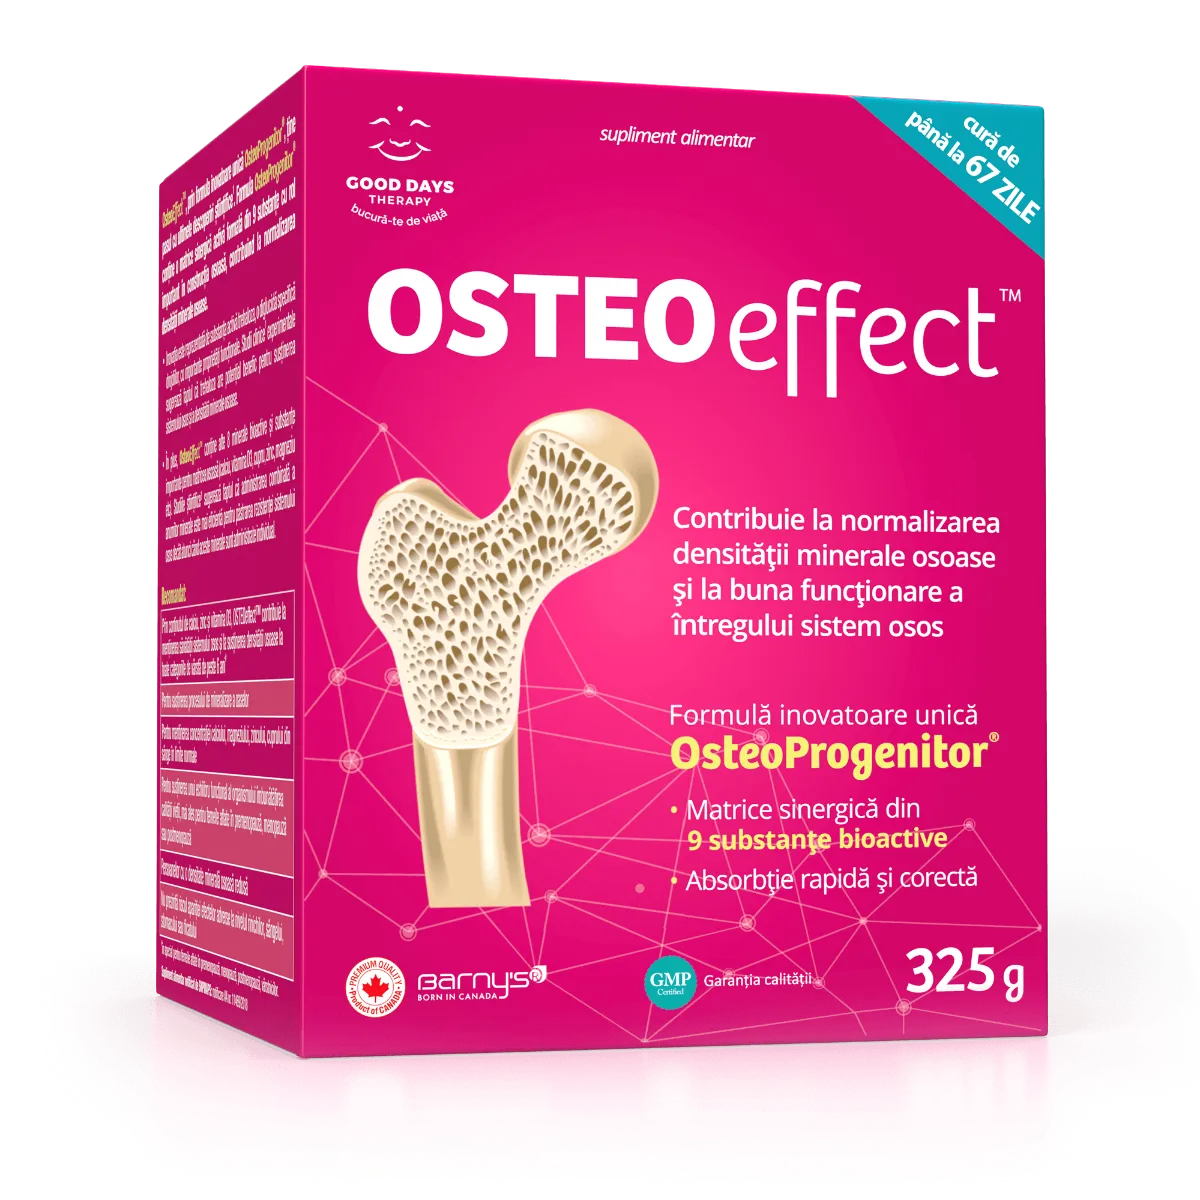 OsteoEffect, 325g, Good Days Therapy